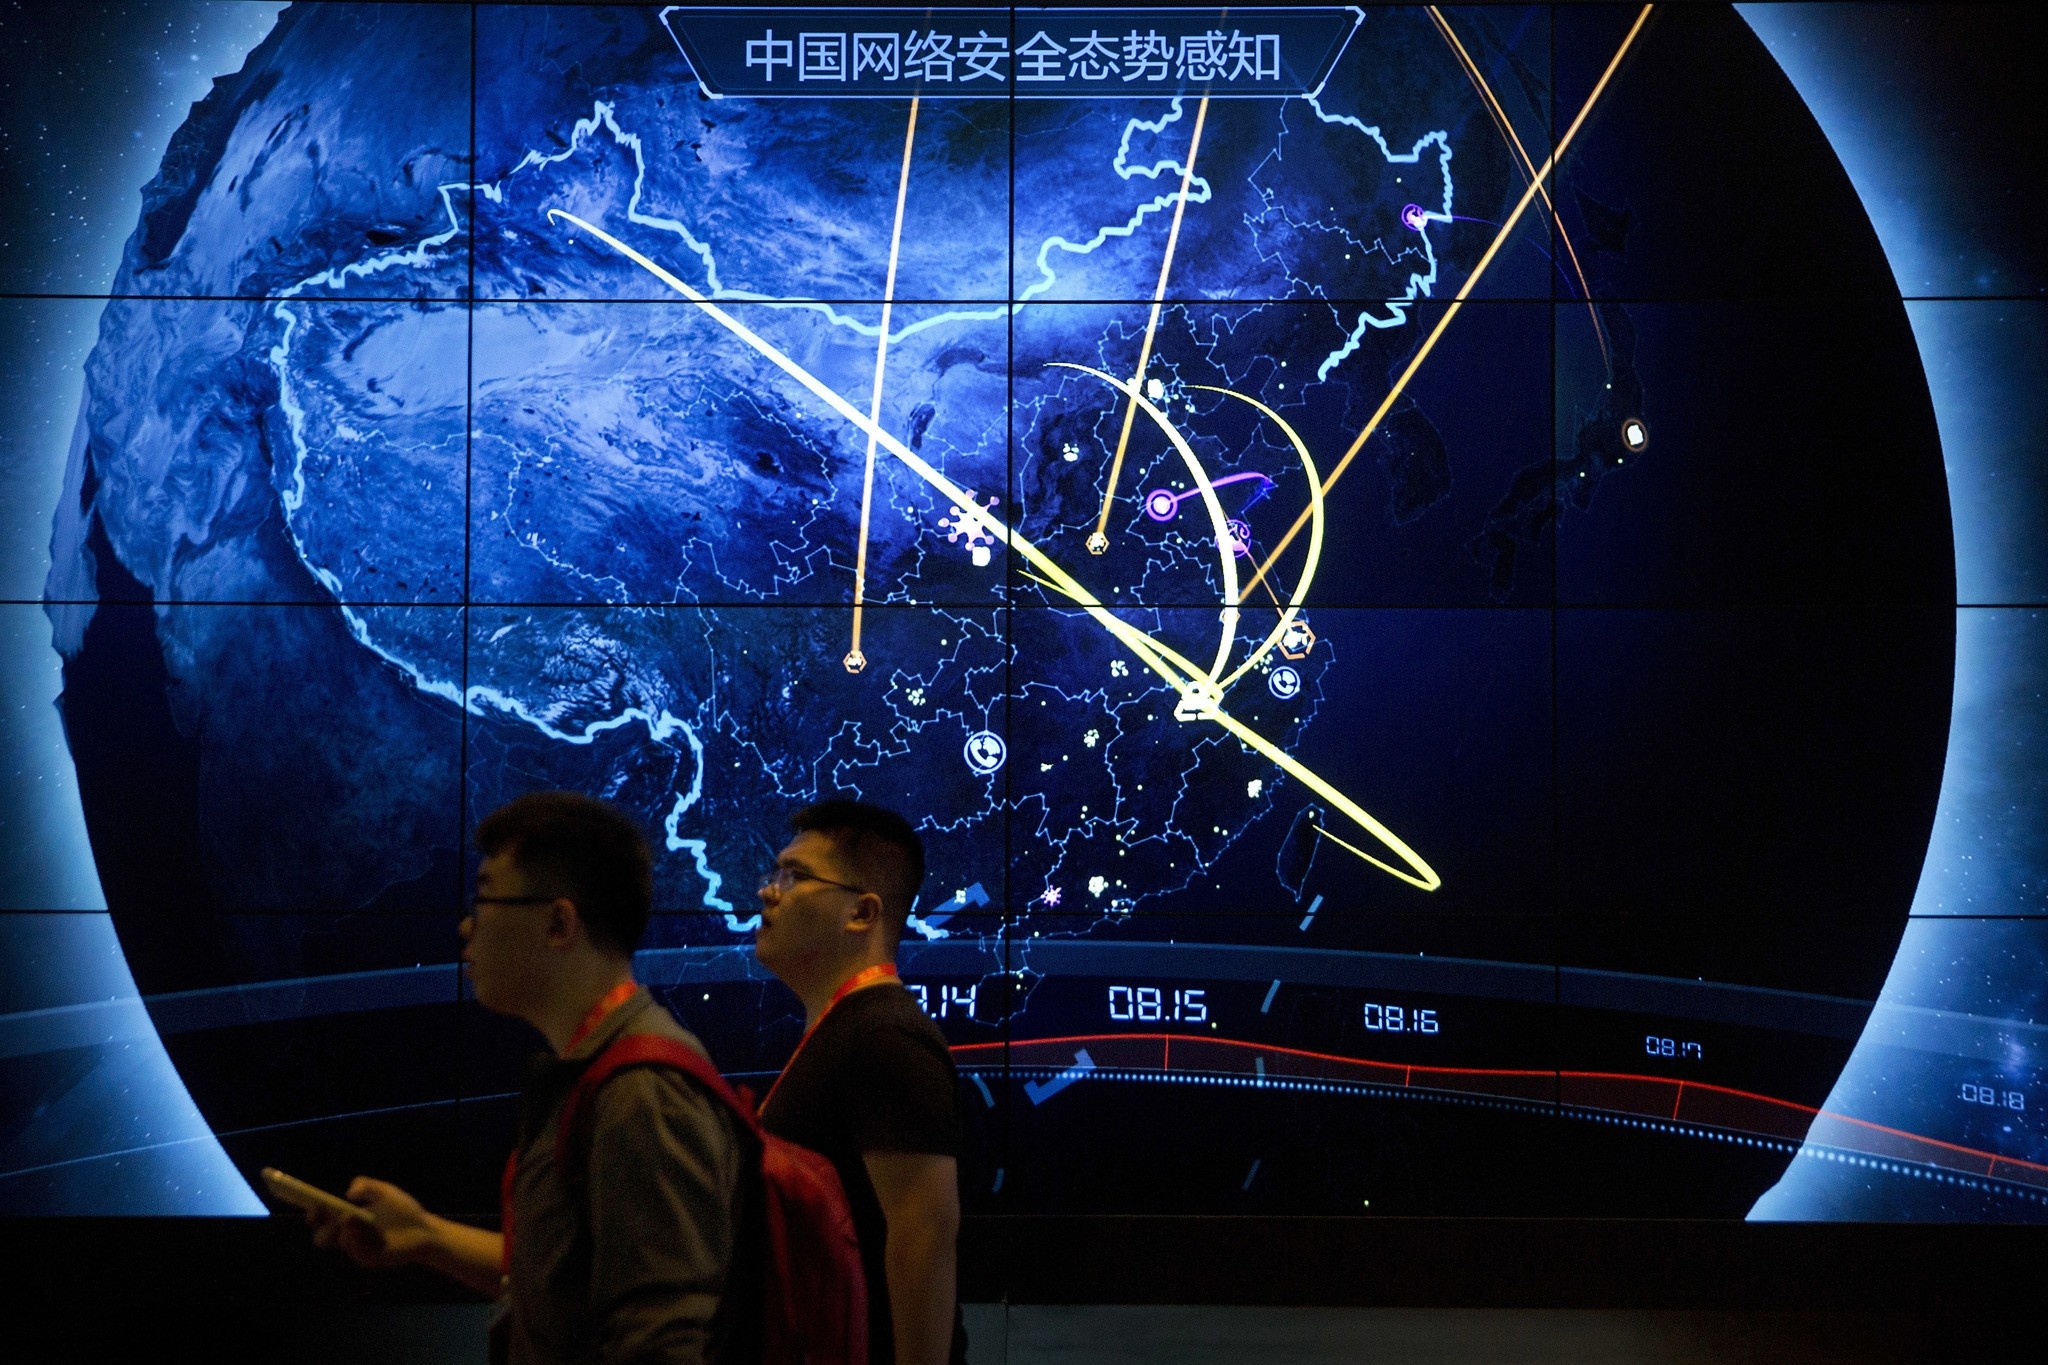 Attendees walk past an electronic display showing recent cyberattacks in China at the China Internet Security Conference in Beijing, Tuesday, Sept. 12, 2017. (AP Photo)